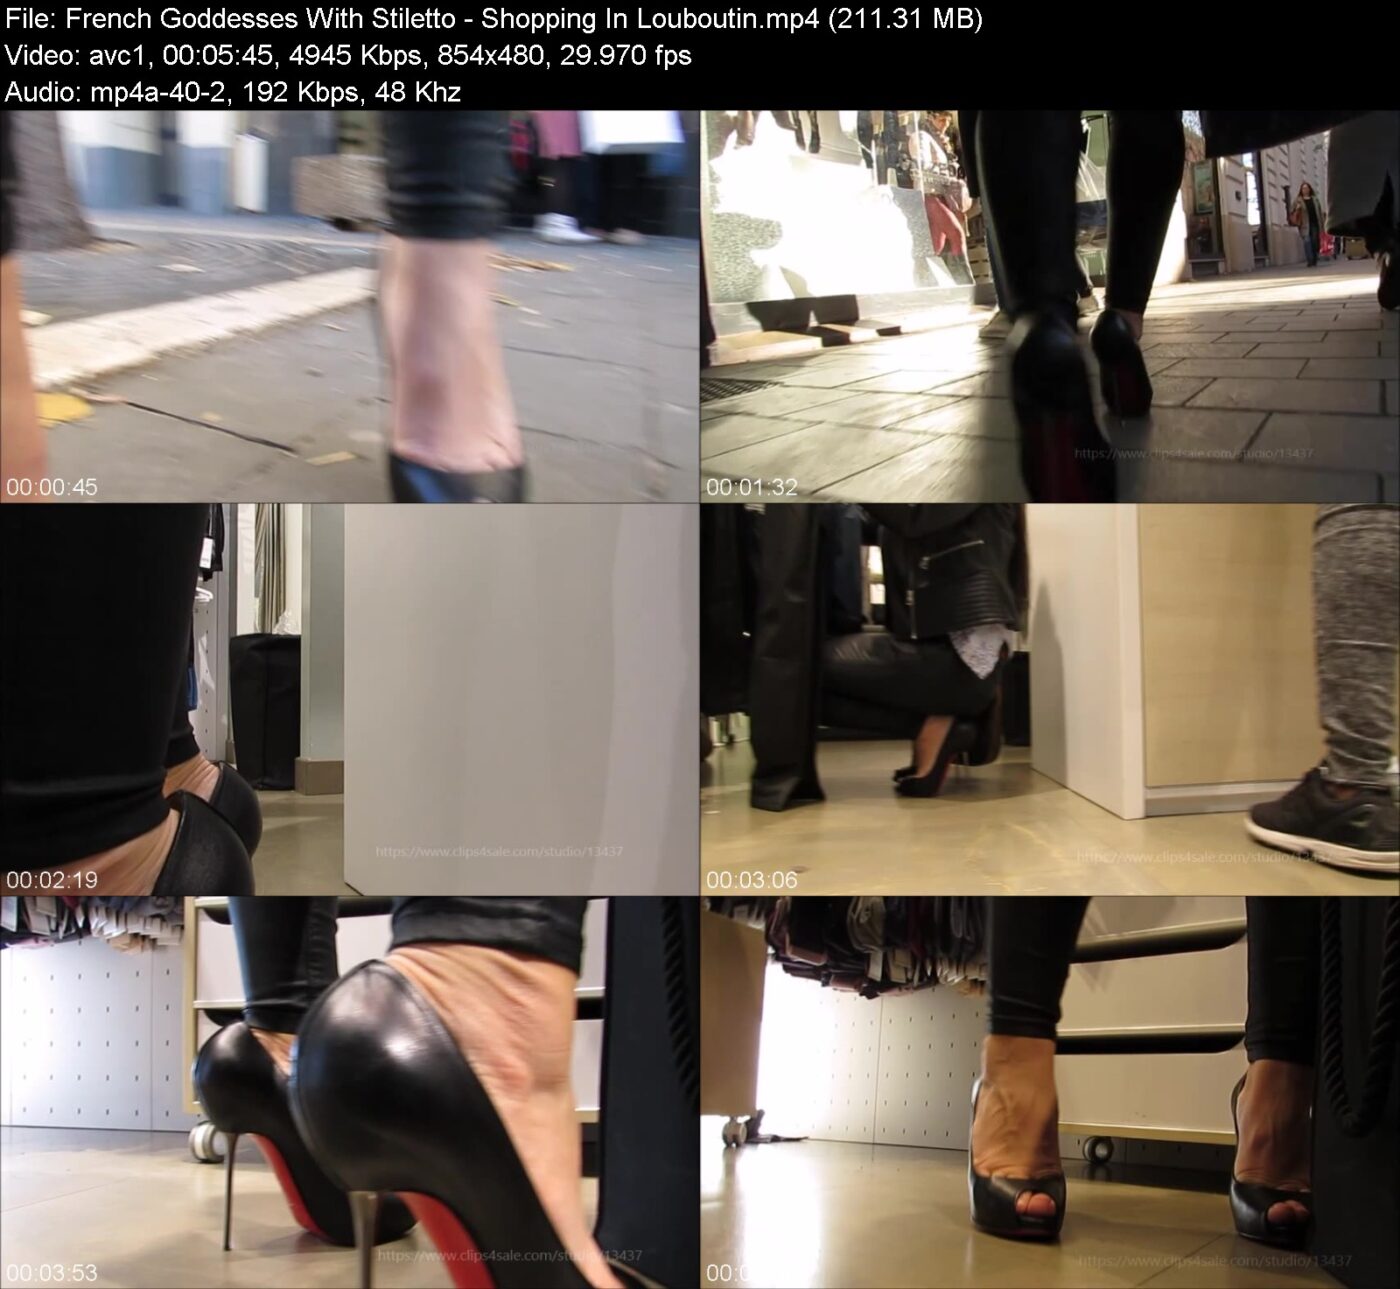 Actress: French Goddesses With Stiletto. Title and Studio: Shopping In Louboutin